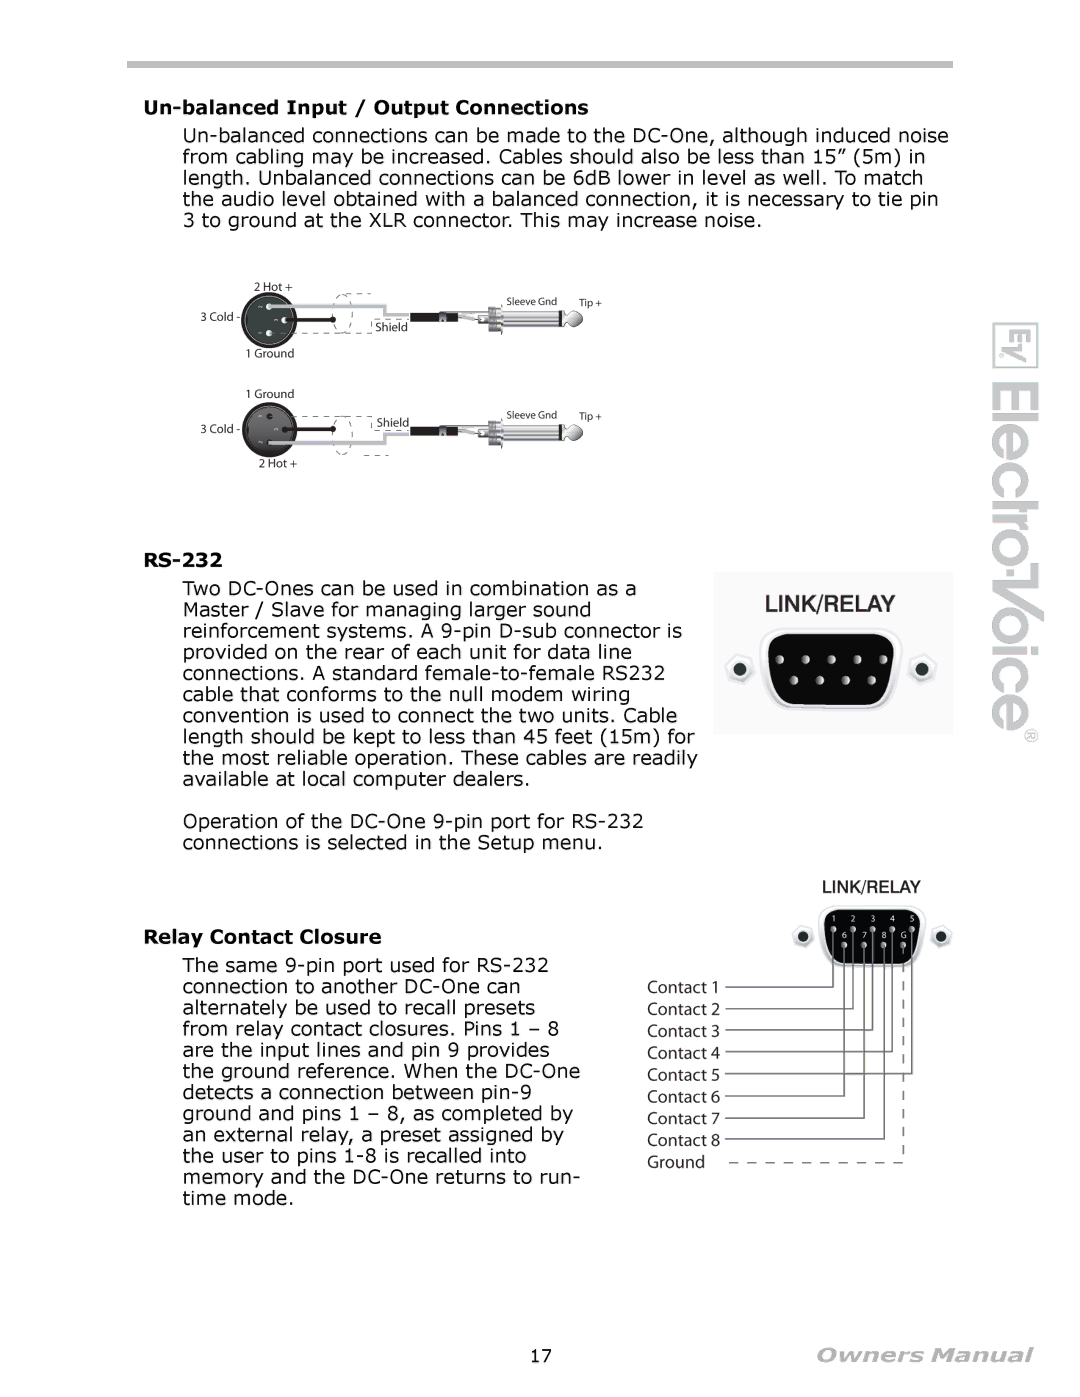 Electro-Voice Speaker System owner manual Un-balanced Input / Output Connections, RS-232, Relay Contact Closure 